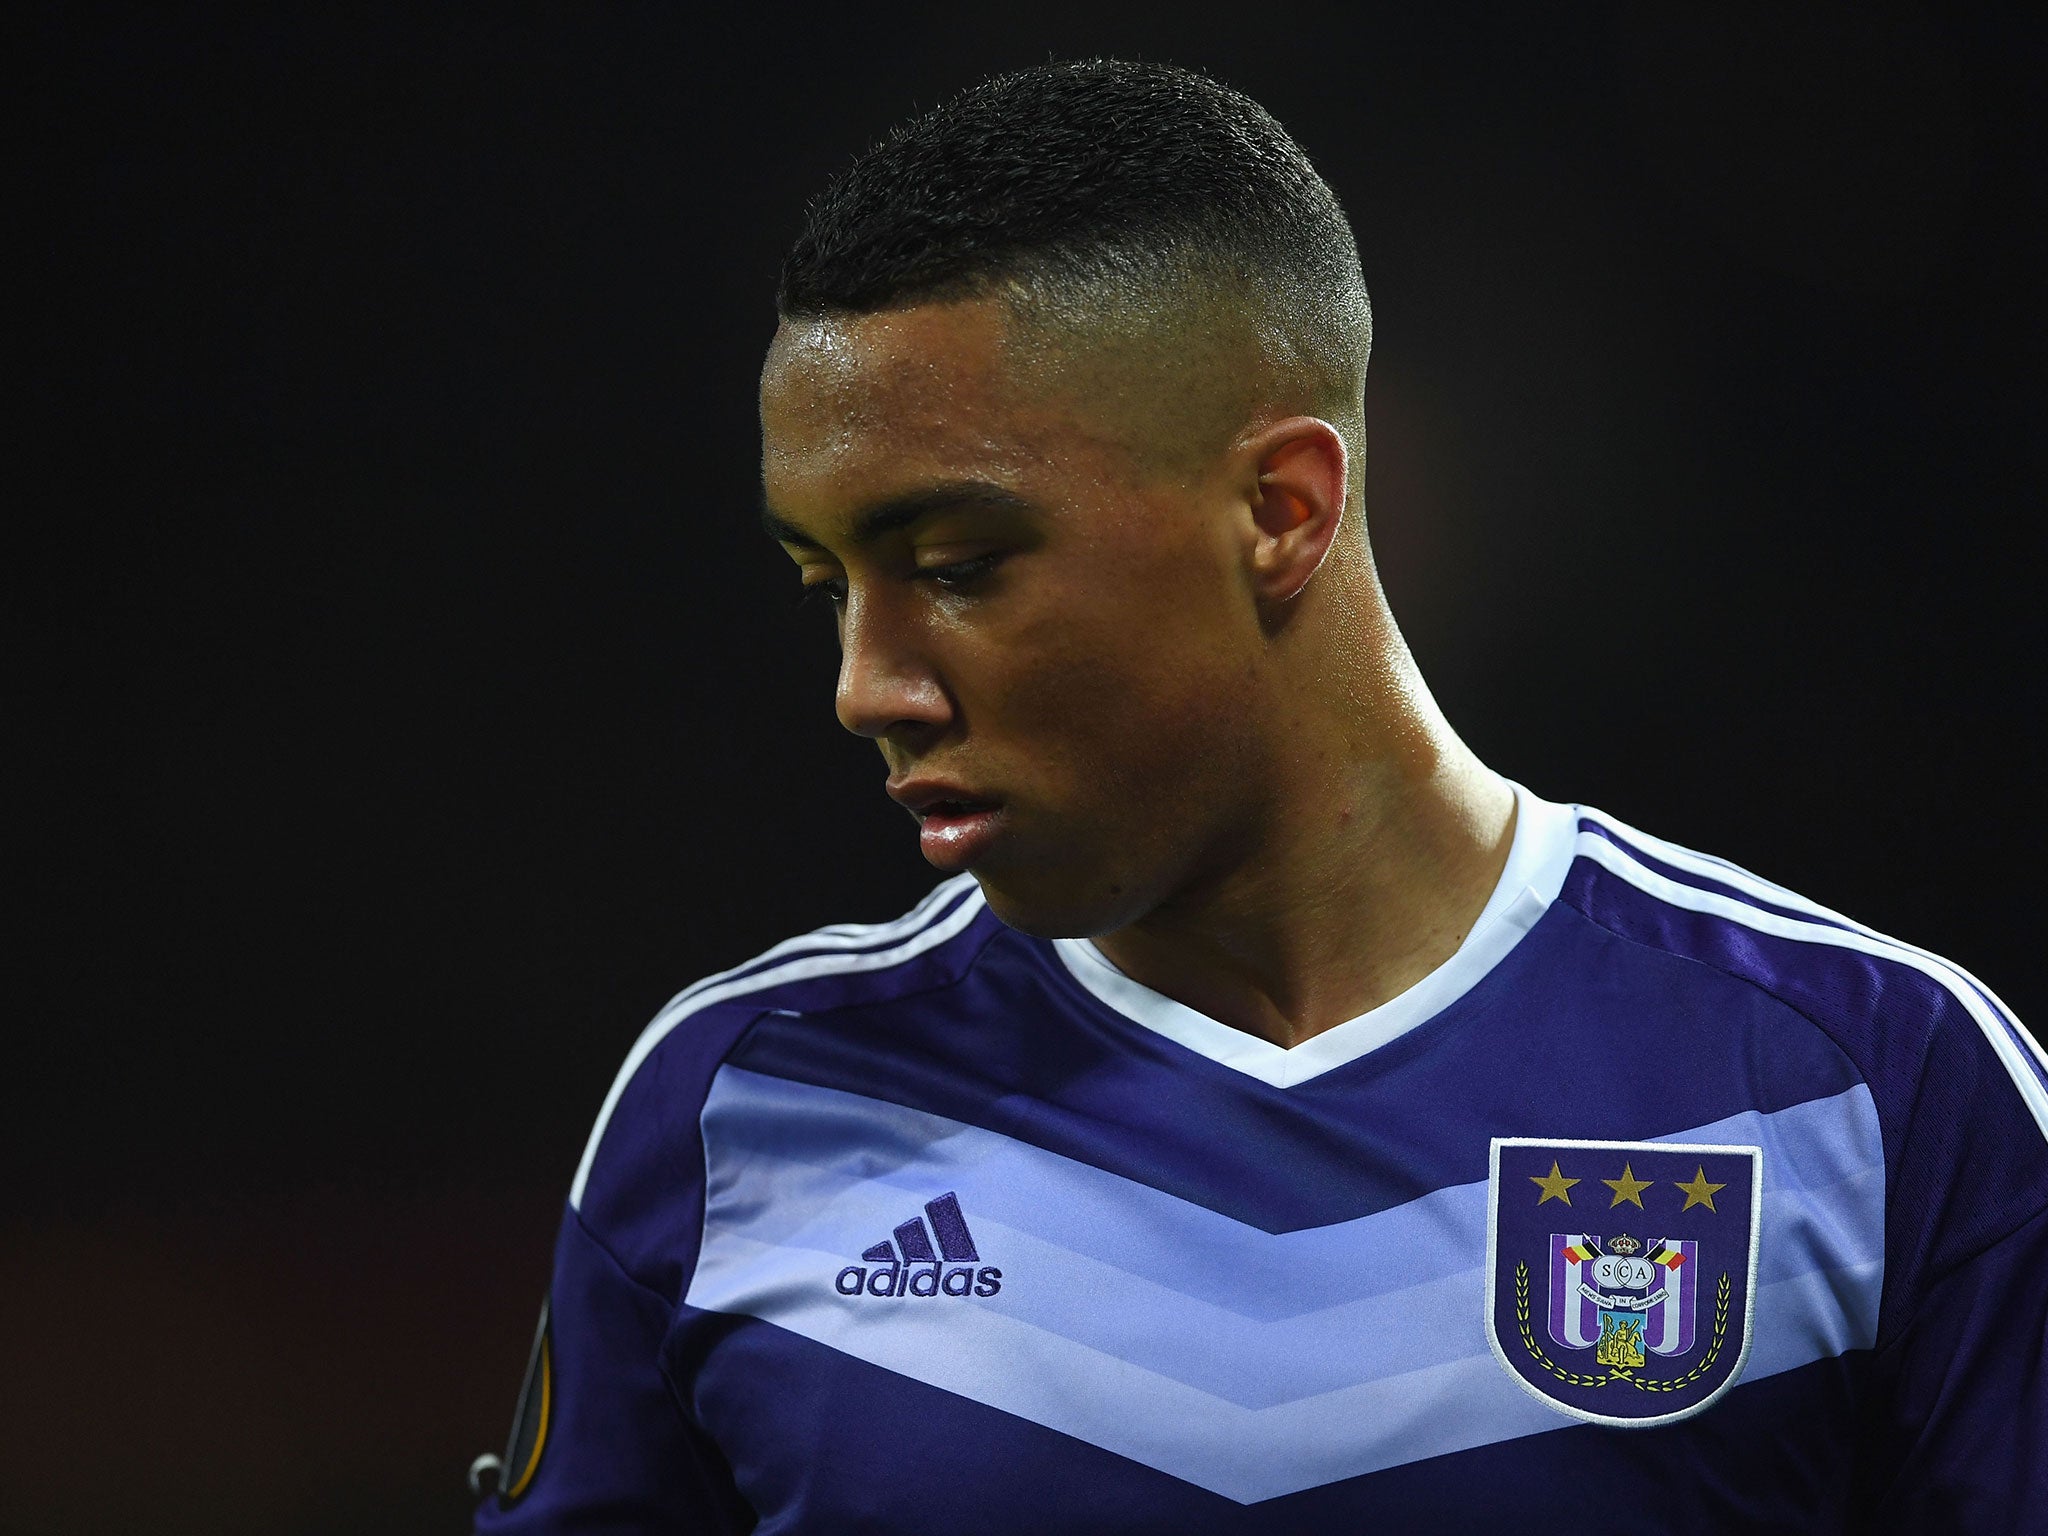 Youri Tielemans has started to make a name for himself